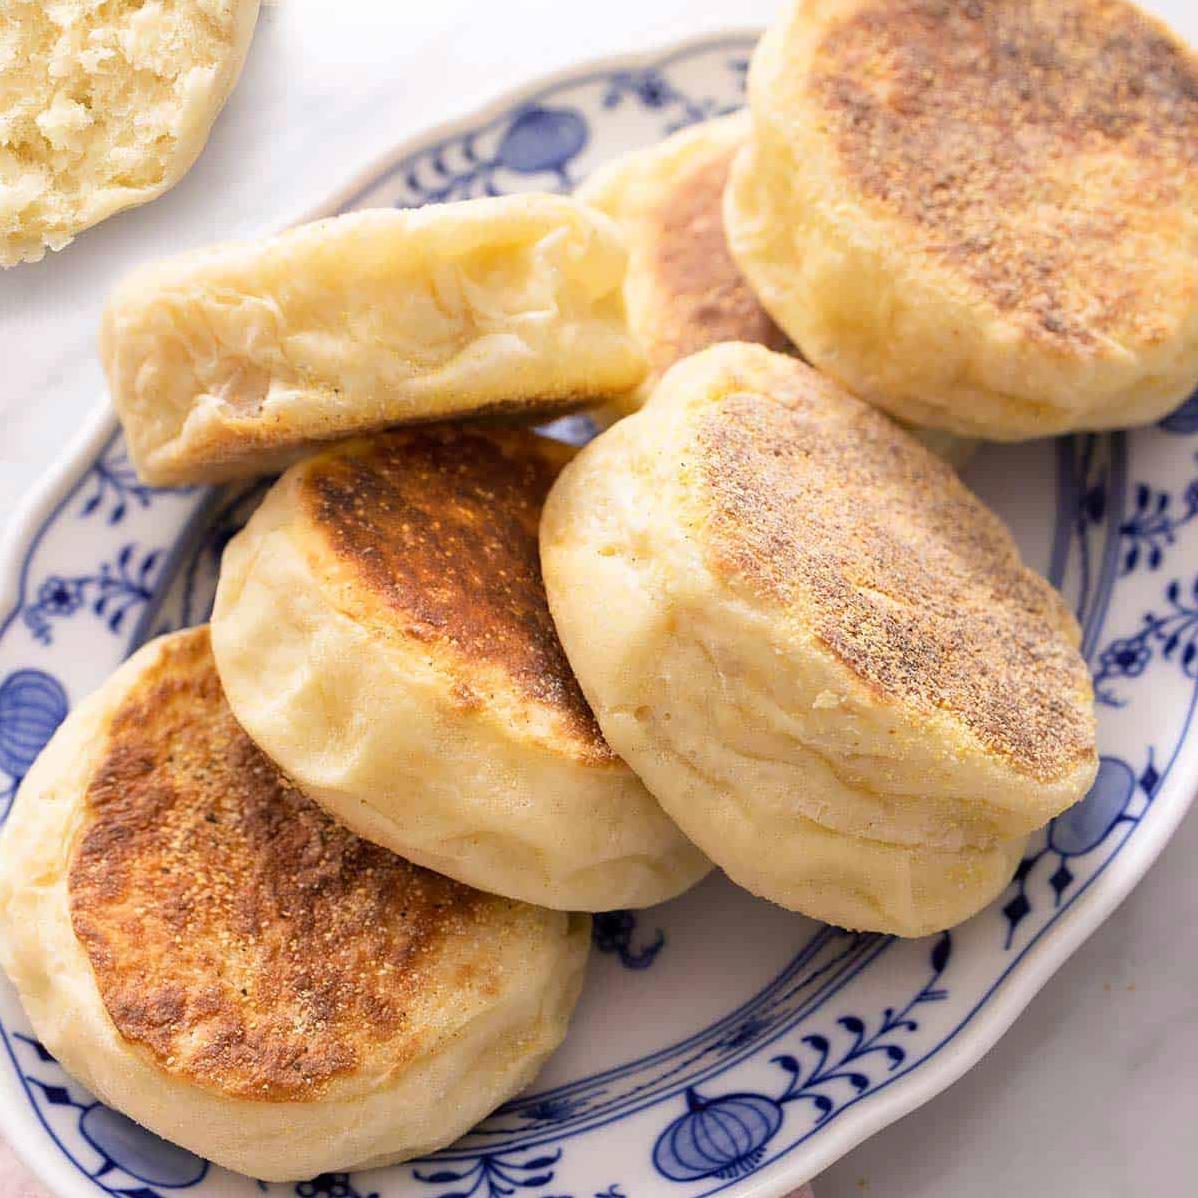  Golden brown and perfectly toasted; these English muffins are calling your name.